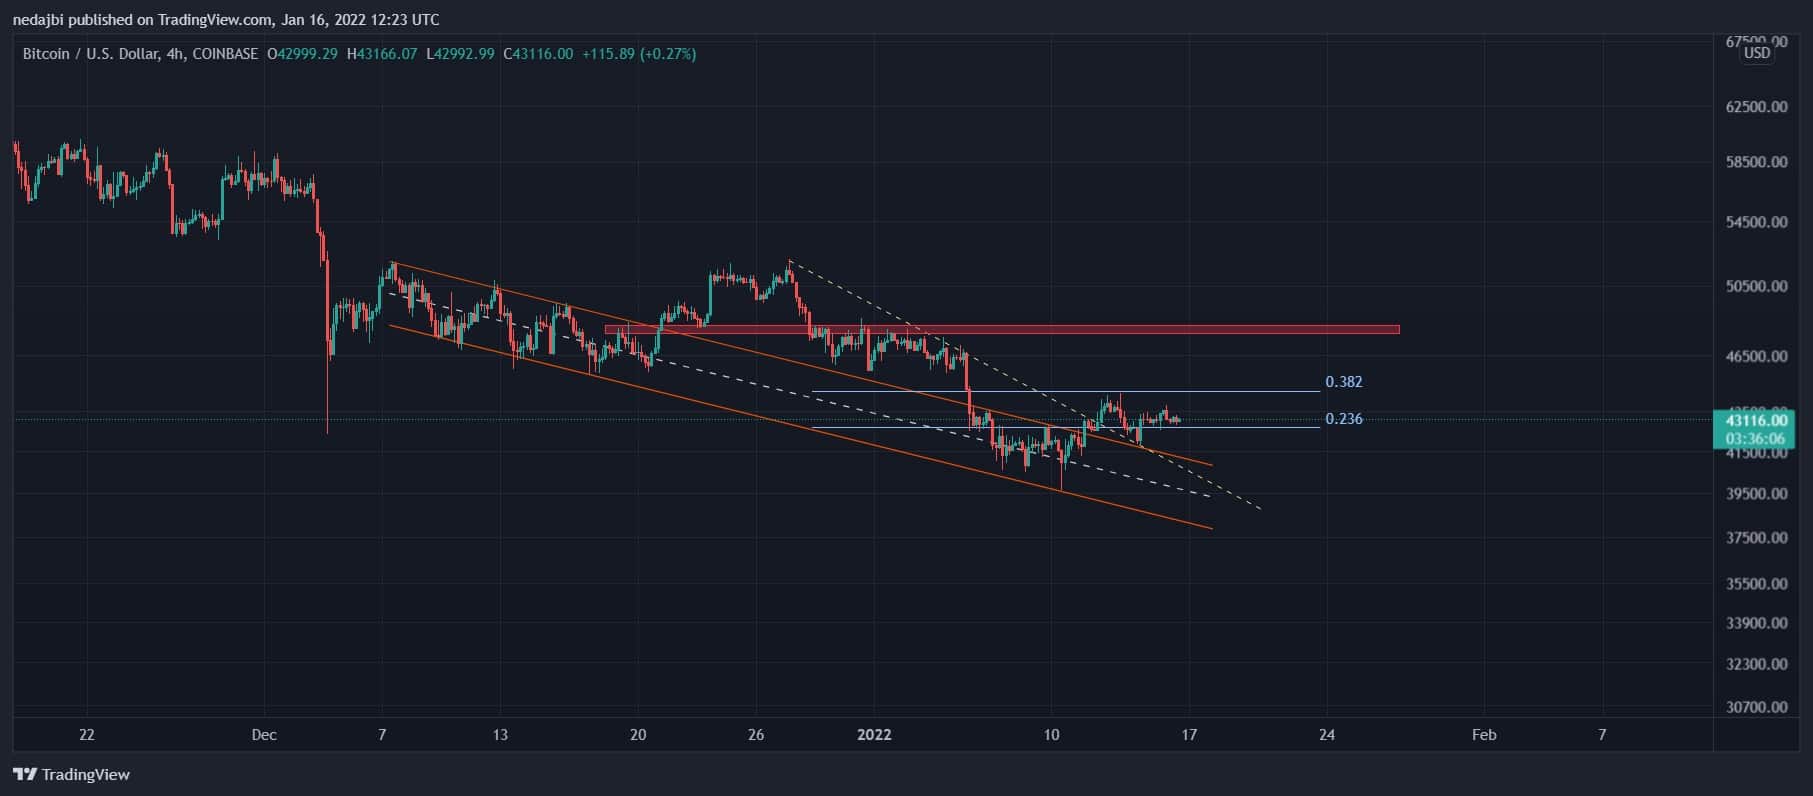 This-is-the-next-key-resistance-for-btc:-bitcoin-price-analysis